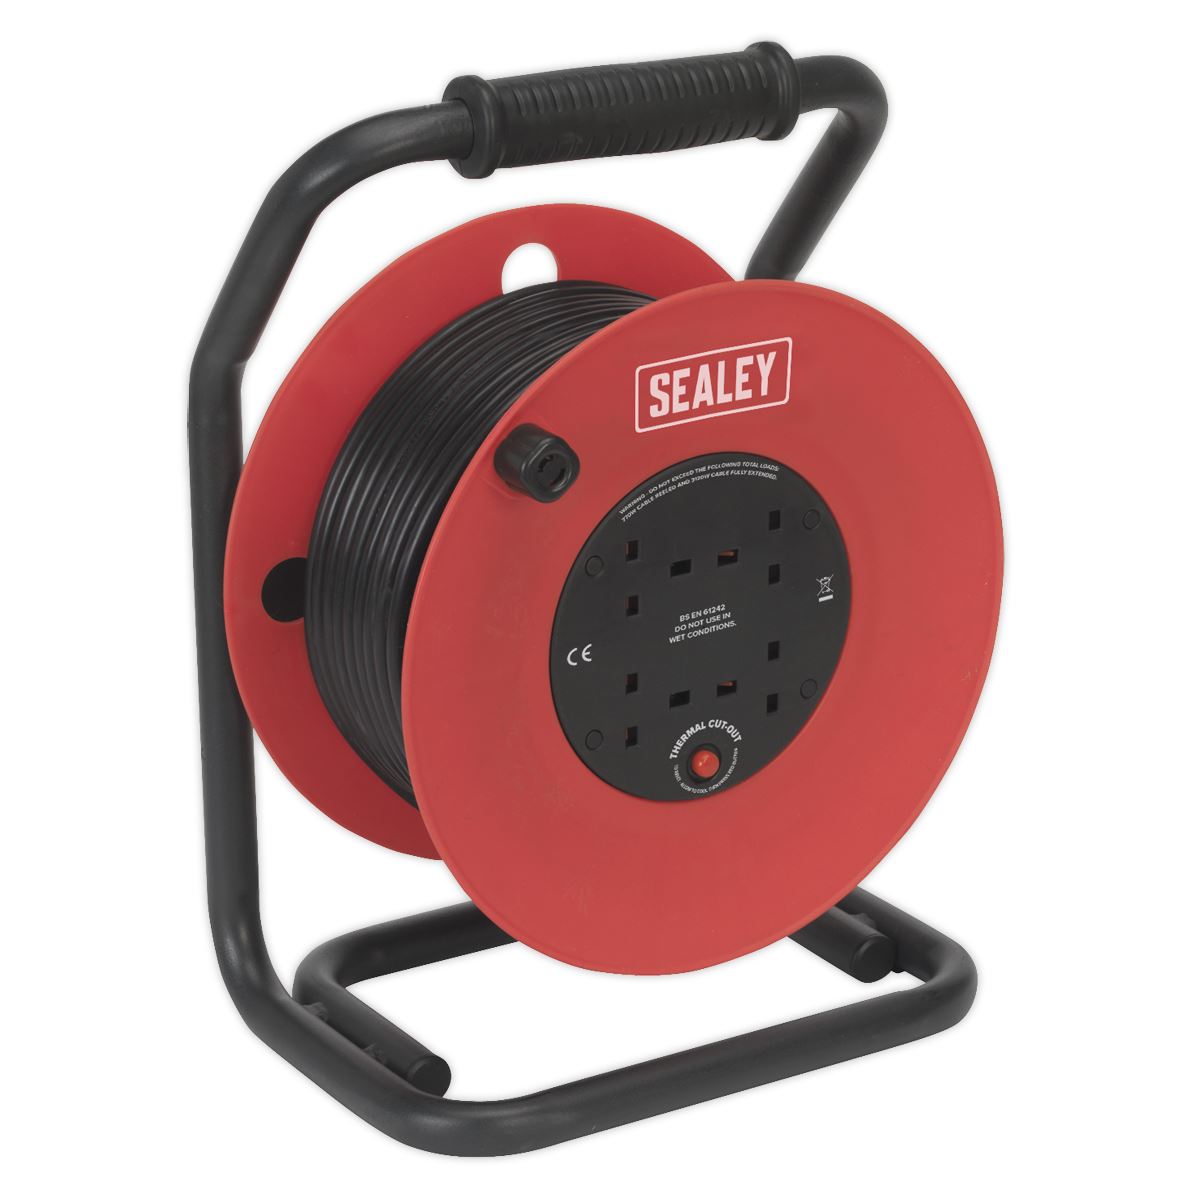 Sealey Cable Reel 50m 4 x 230V 1.5mm Heavy-Duty Thermal Trip CR50/1.5